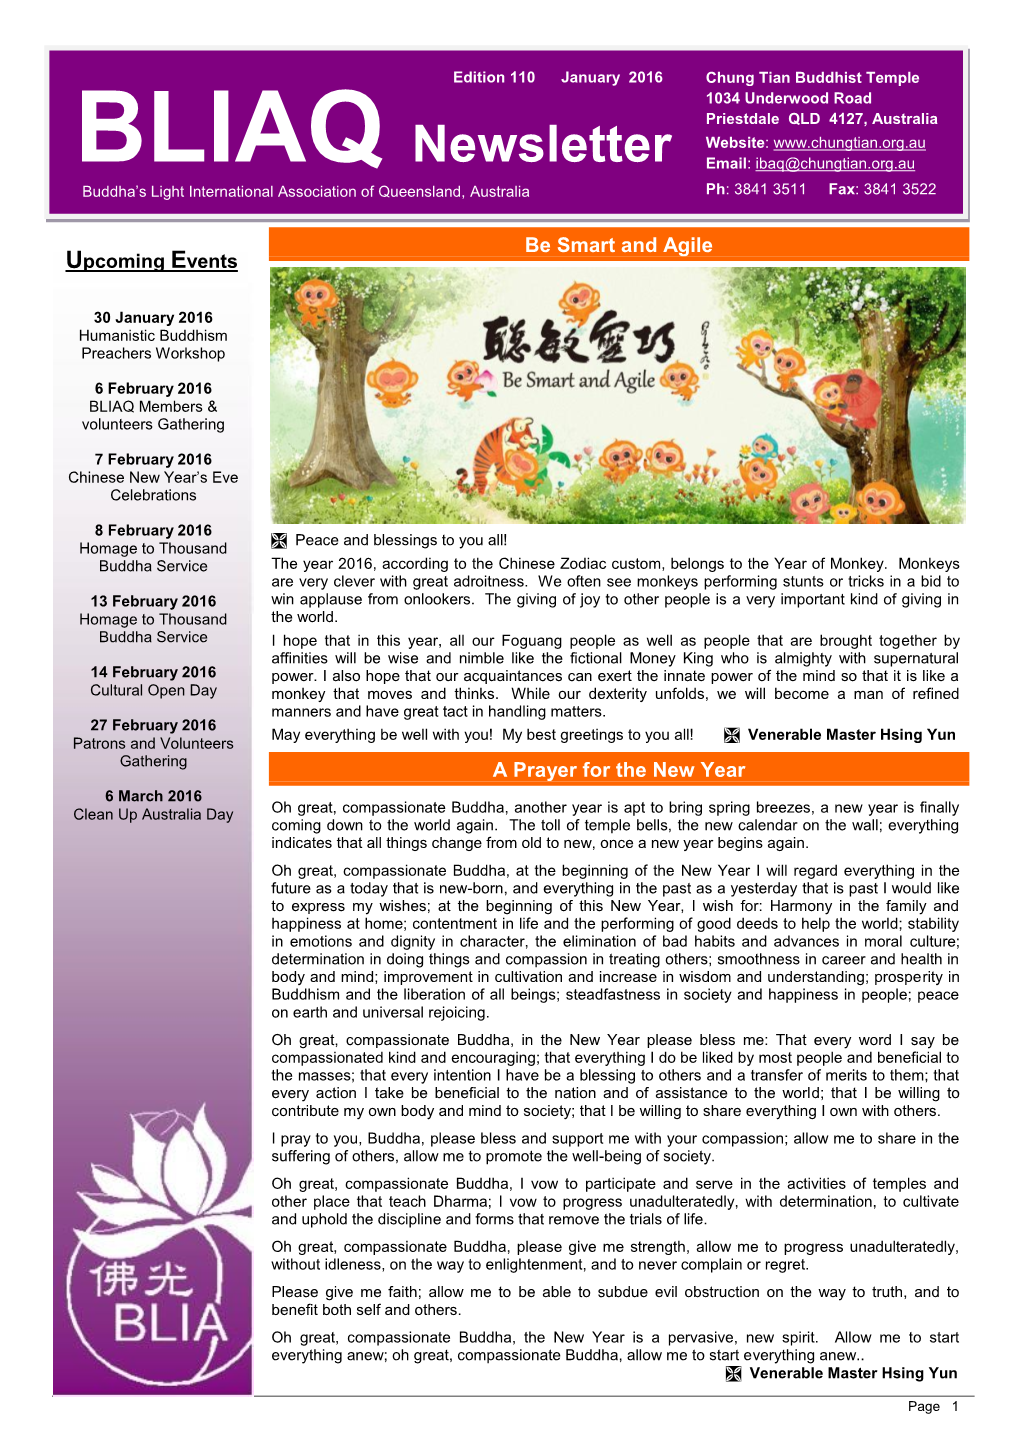 BLIAQ Newsletter Email: Ibaq@Chungtian.Org.Au